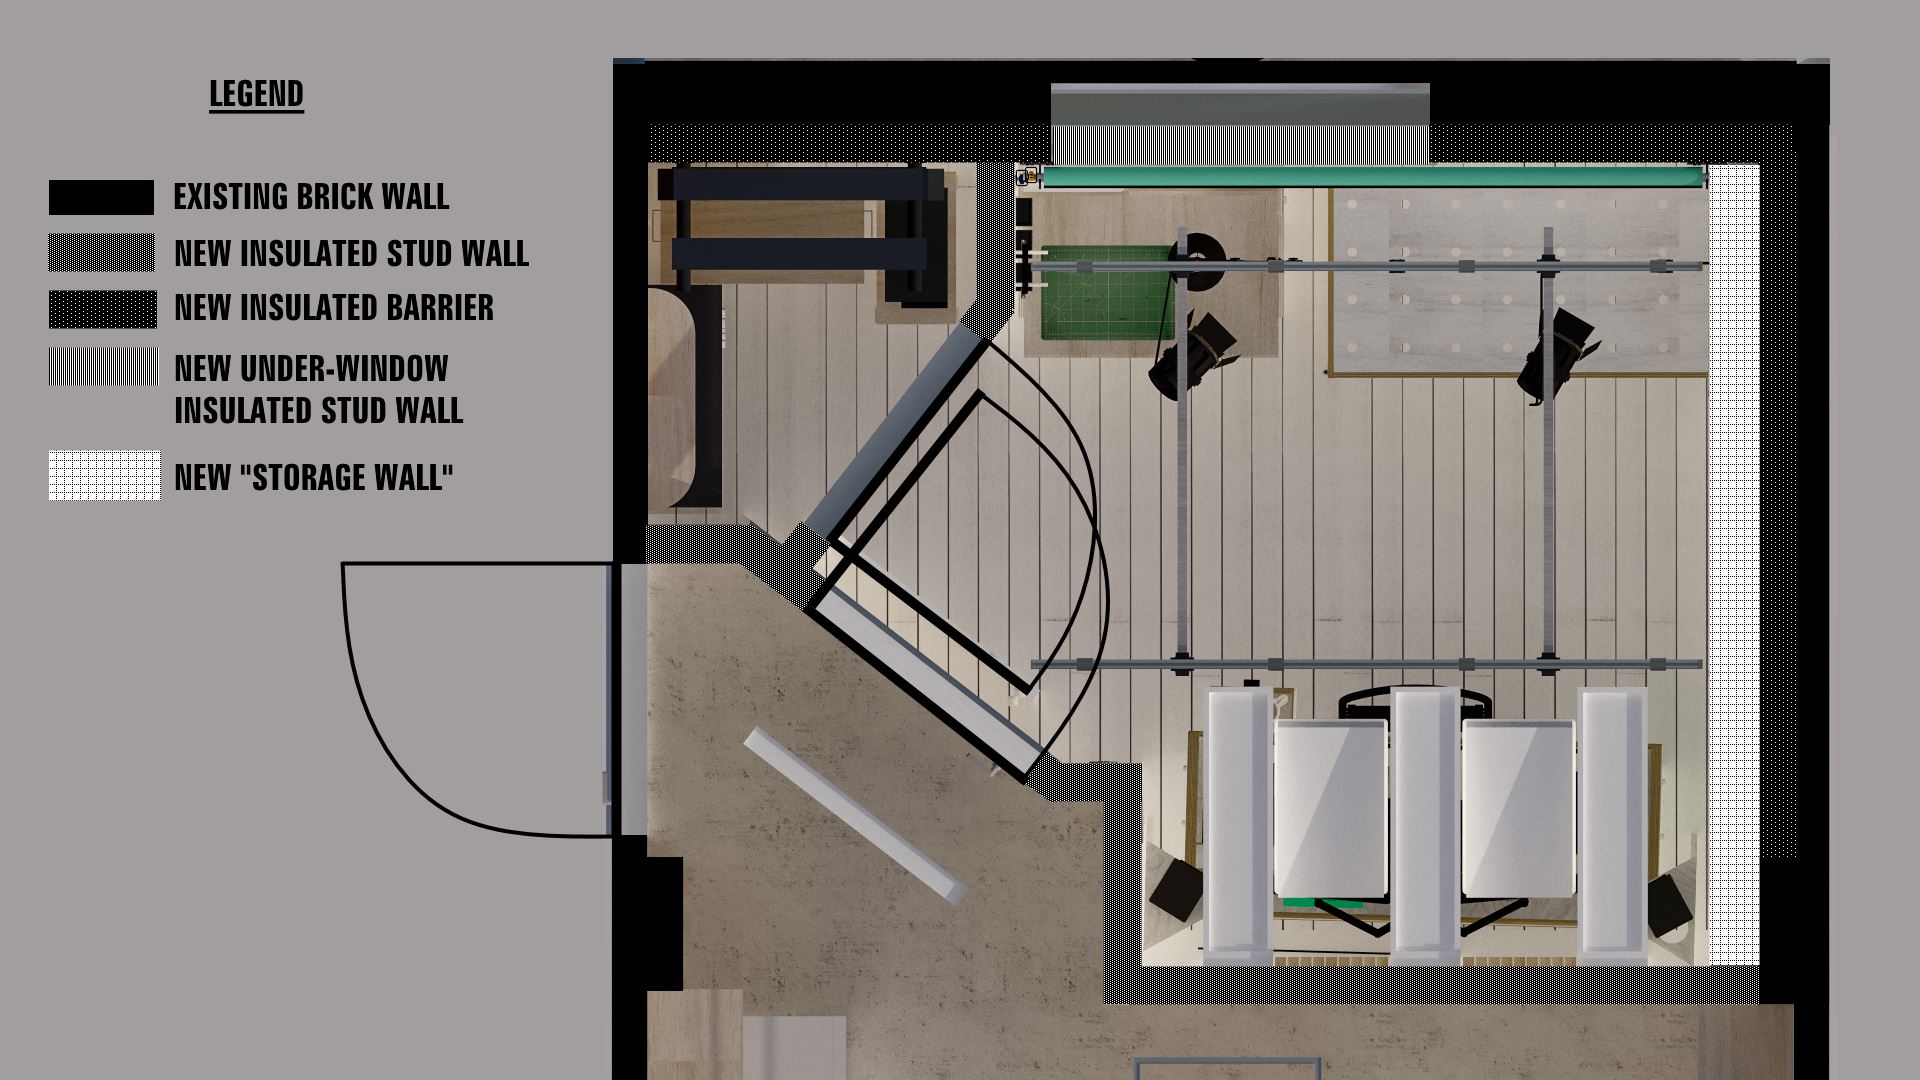 The floorplan shows how much studio space is lost thanks to the existing entry door (that cannot be moved).